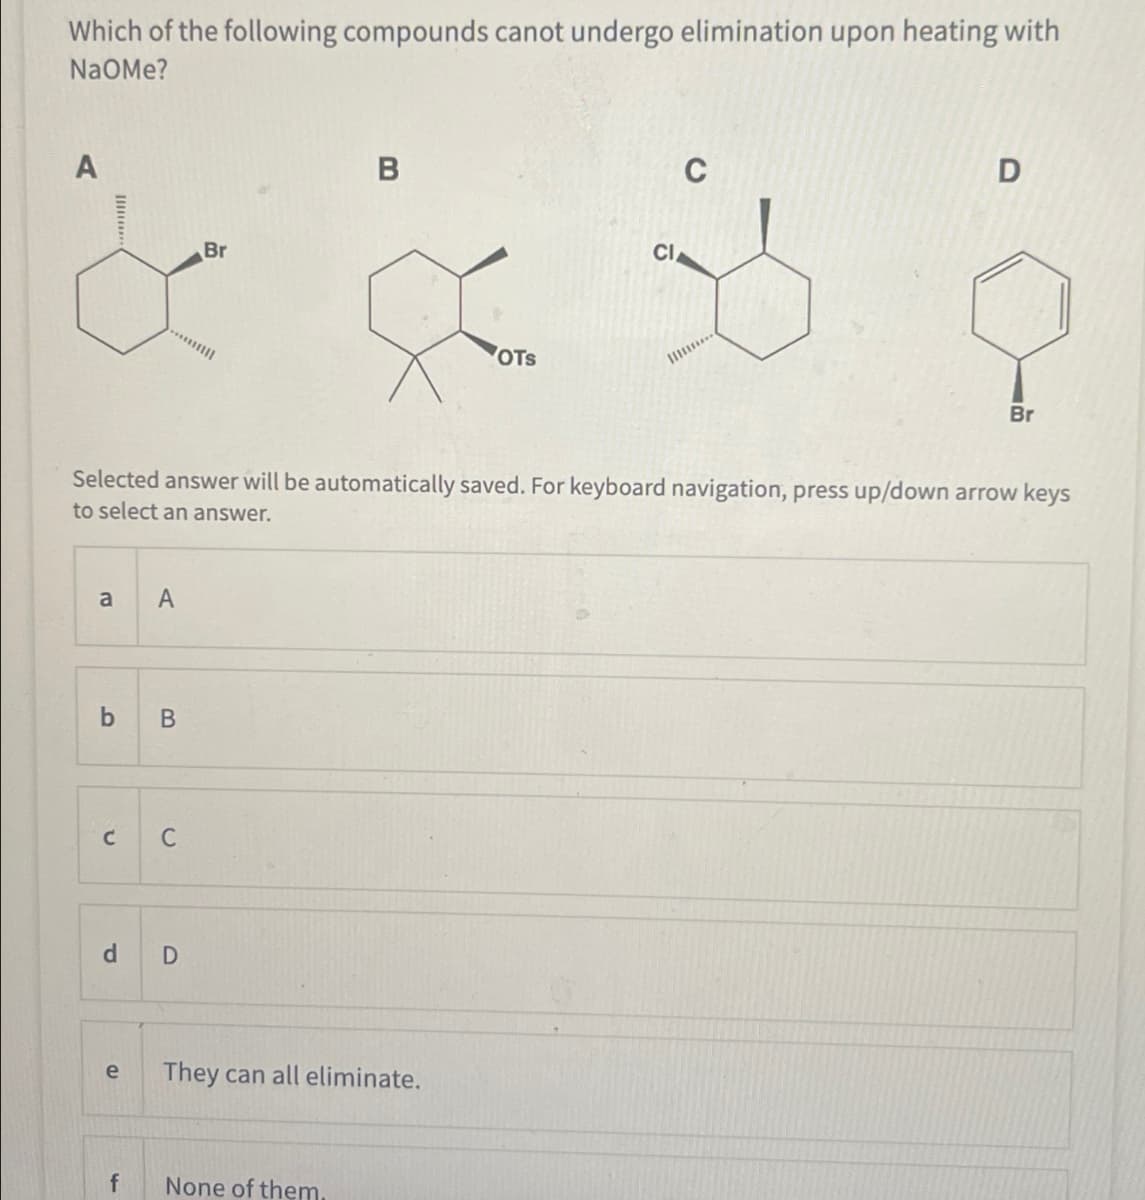 Which of the following compounds canot undergo elimination upon heating with
NaOMe?
A
Br
B
OTS
CI
C
D
Br
Selected answer will be automatically saved. For keyboard navigation, press up/down arrow keys
to select an answer.
a
A
b
B
C C
d
D
e
They can all eliminate.
f
None of them.